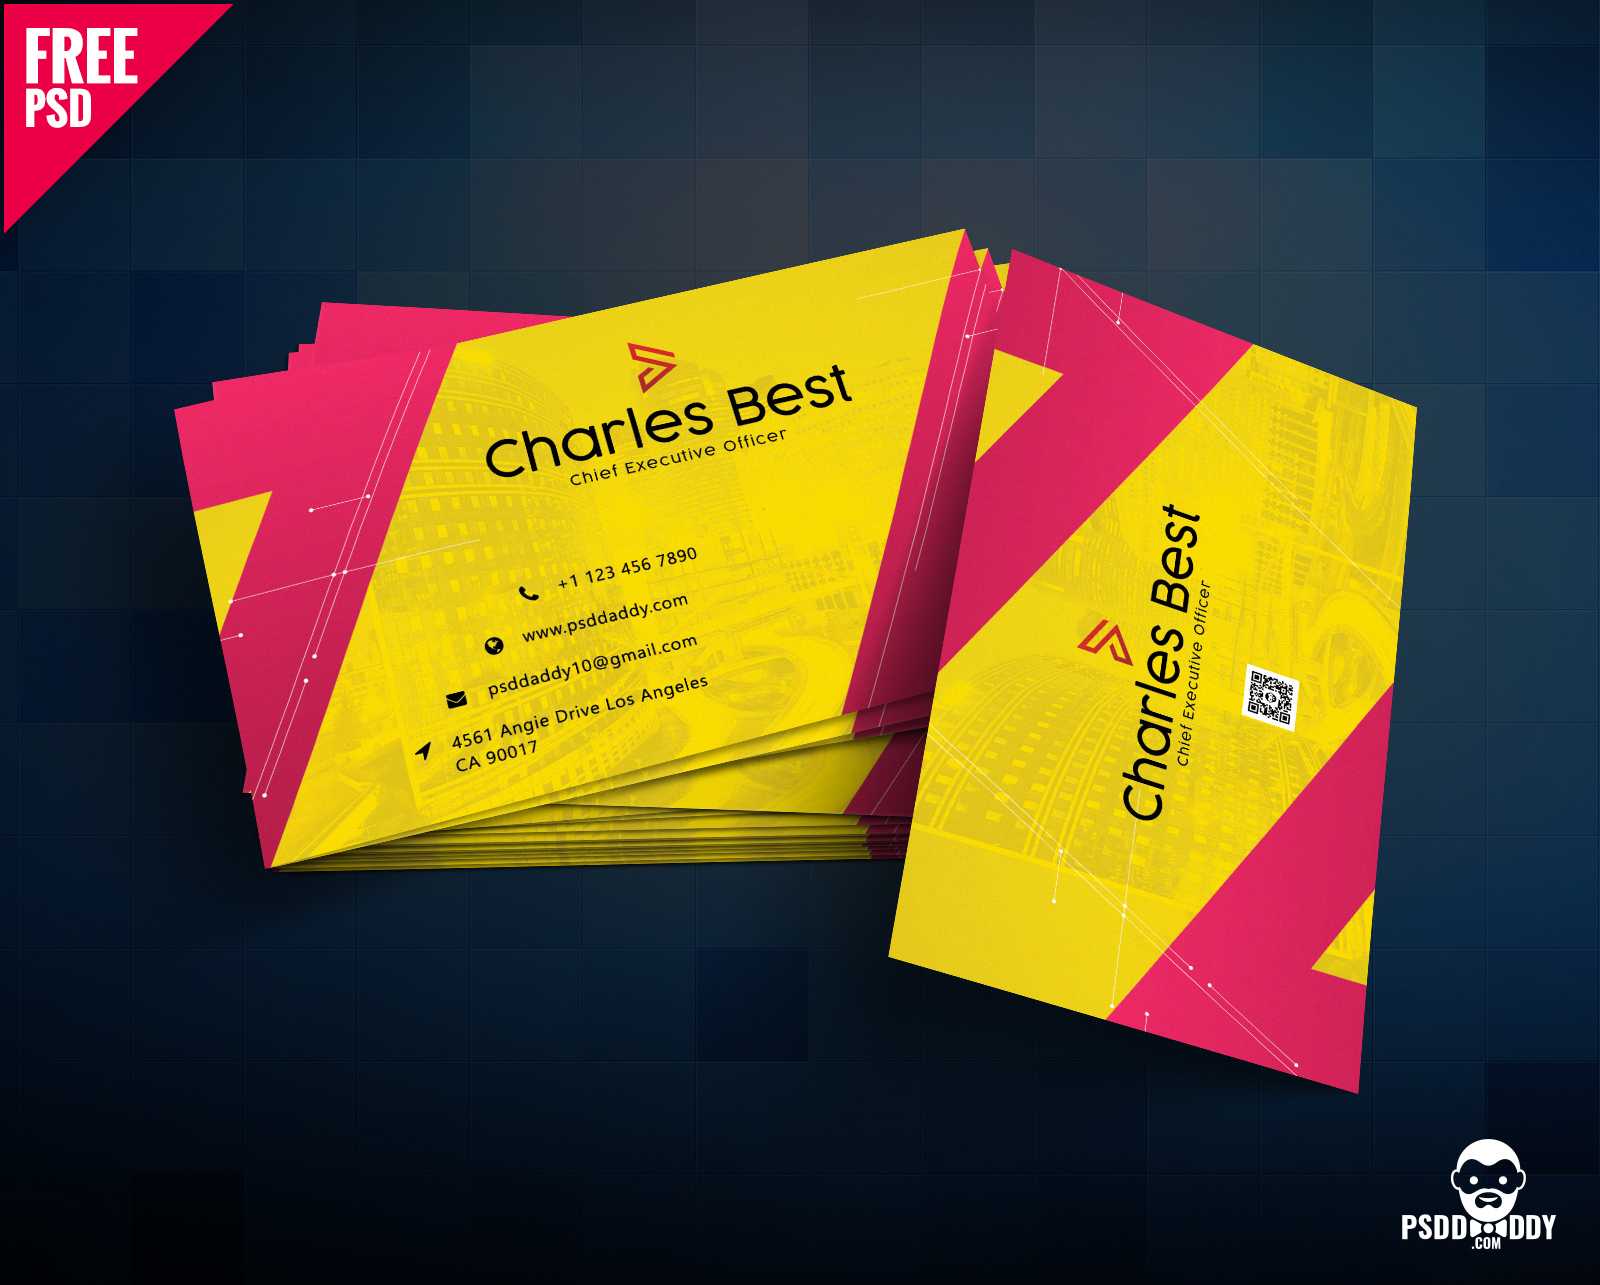 Download] Creative Business Card Free Psd | Psddaddy With Regard To Business Card Size Psd Template